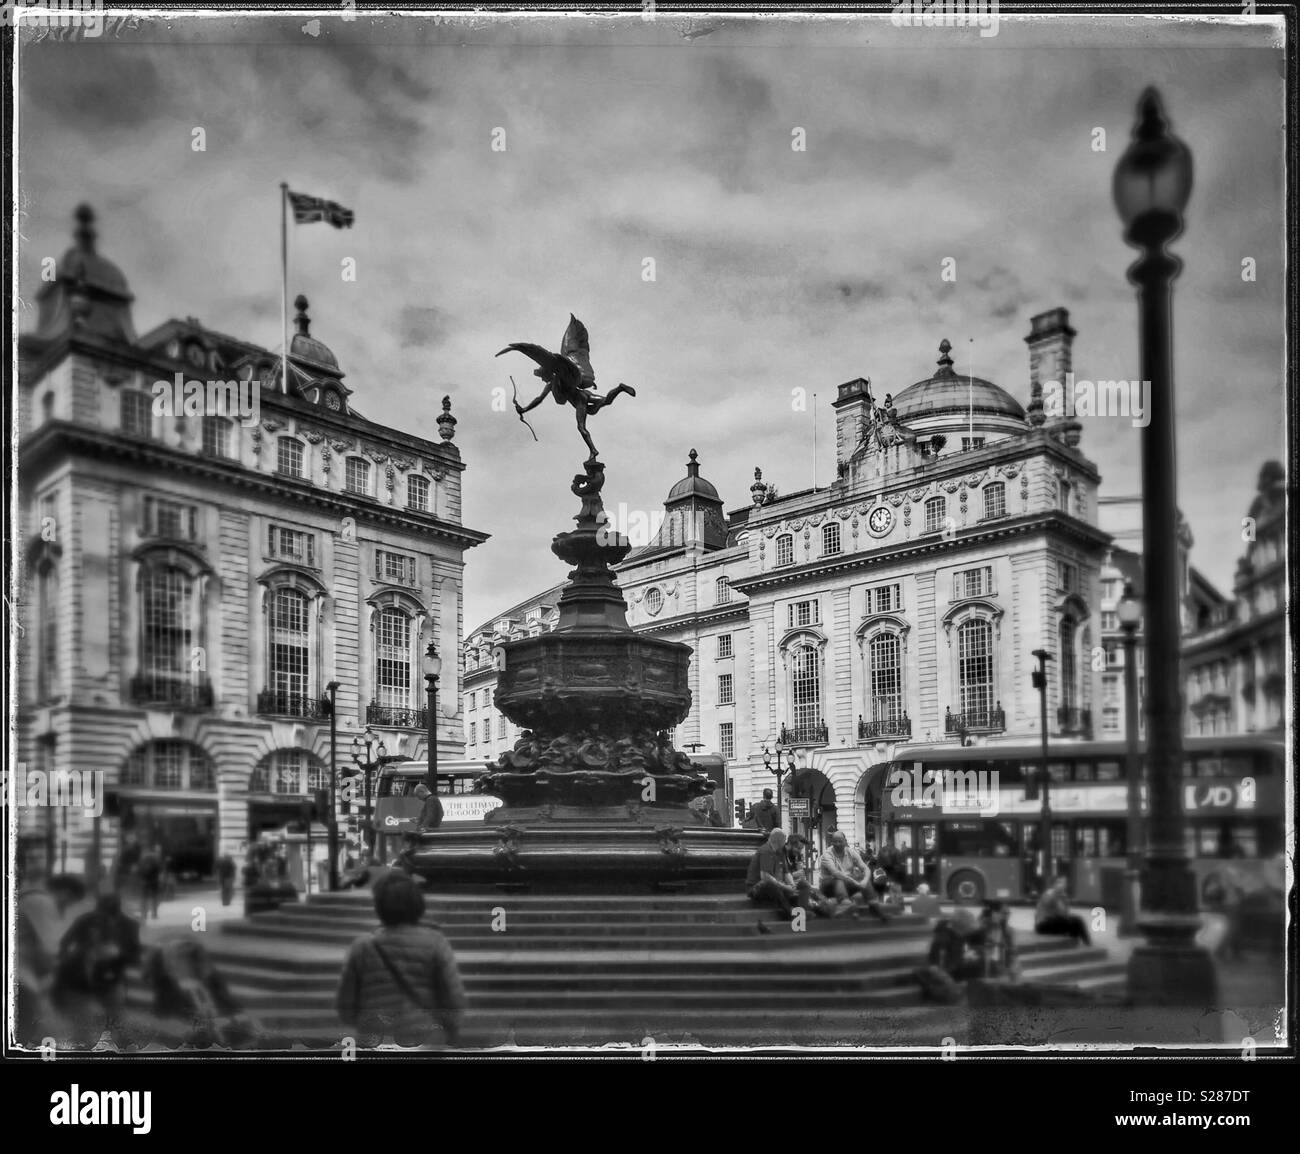 A monochrome, retro effect image of Piccadilly Circus in the centre of London, England. Clearly visible is the statue of Eros. Photo Credit - © COLIN HOSKINS. Stock Photo